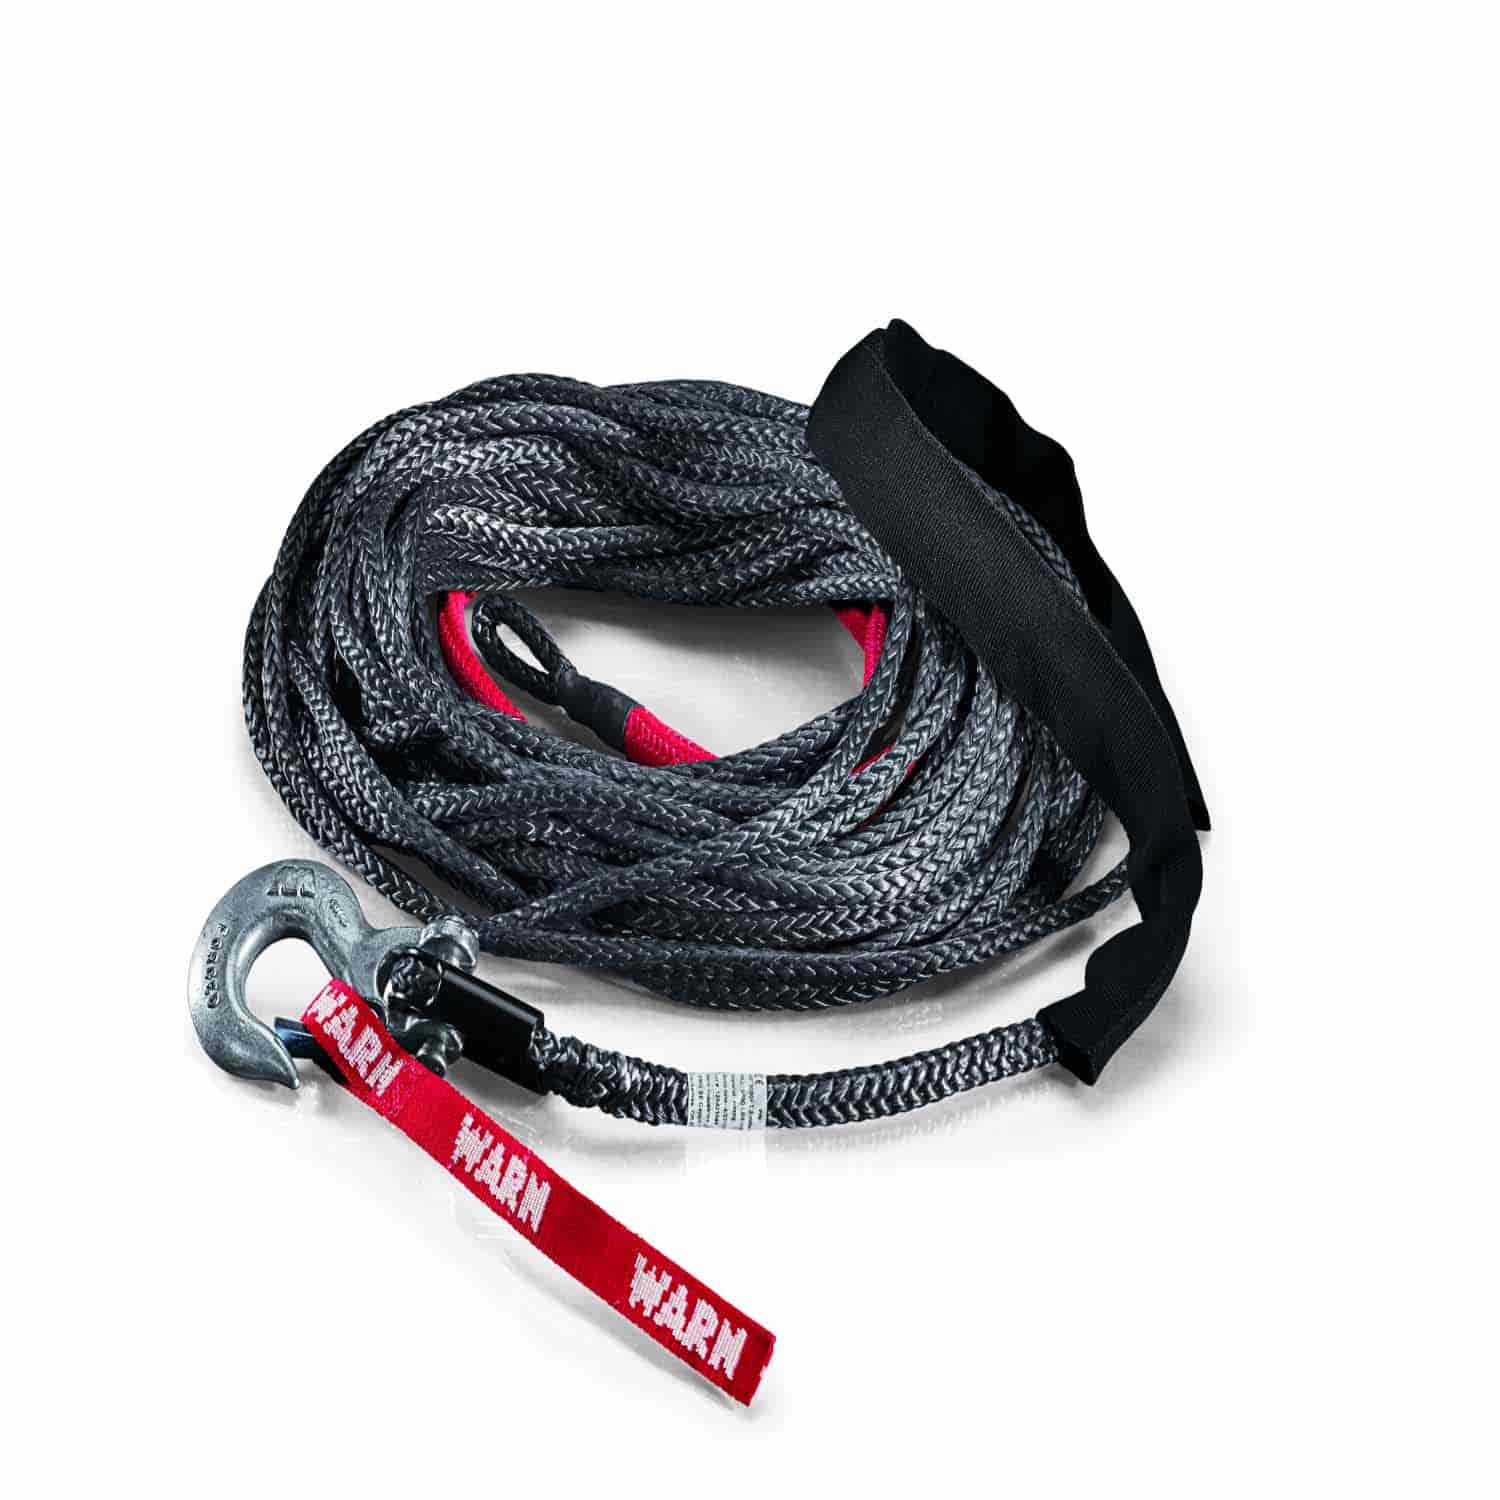 SYNTHETIC ROPE KIT 3/8X80